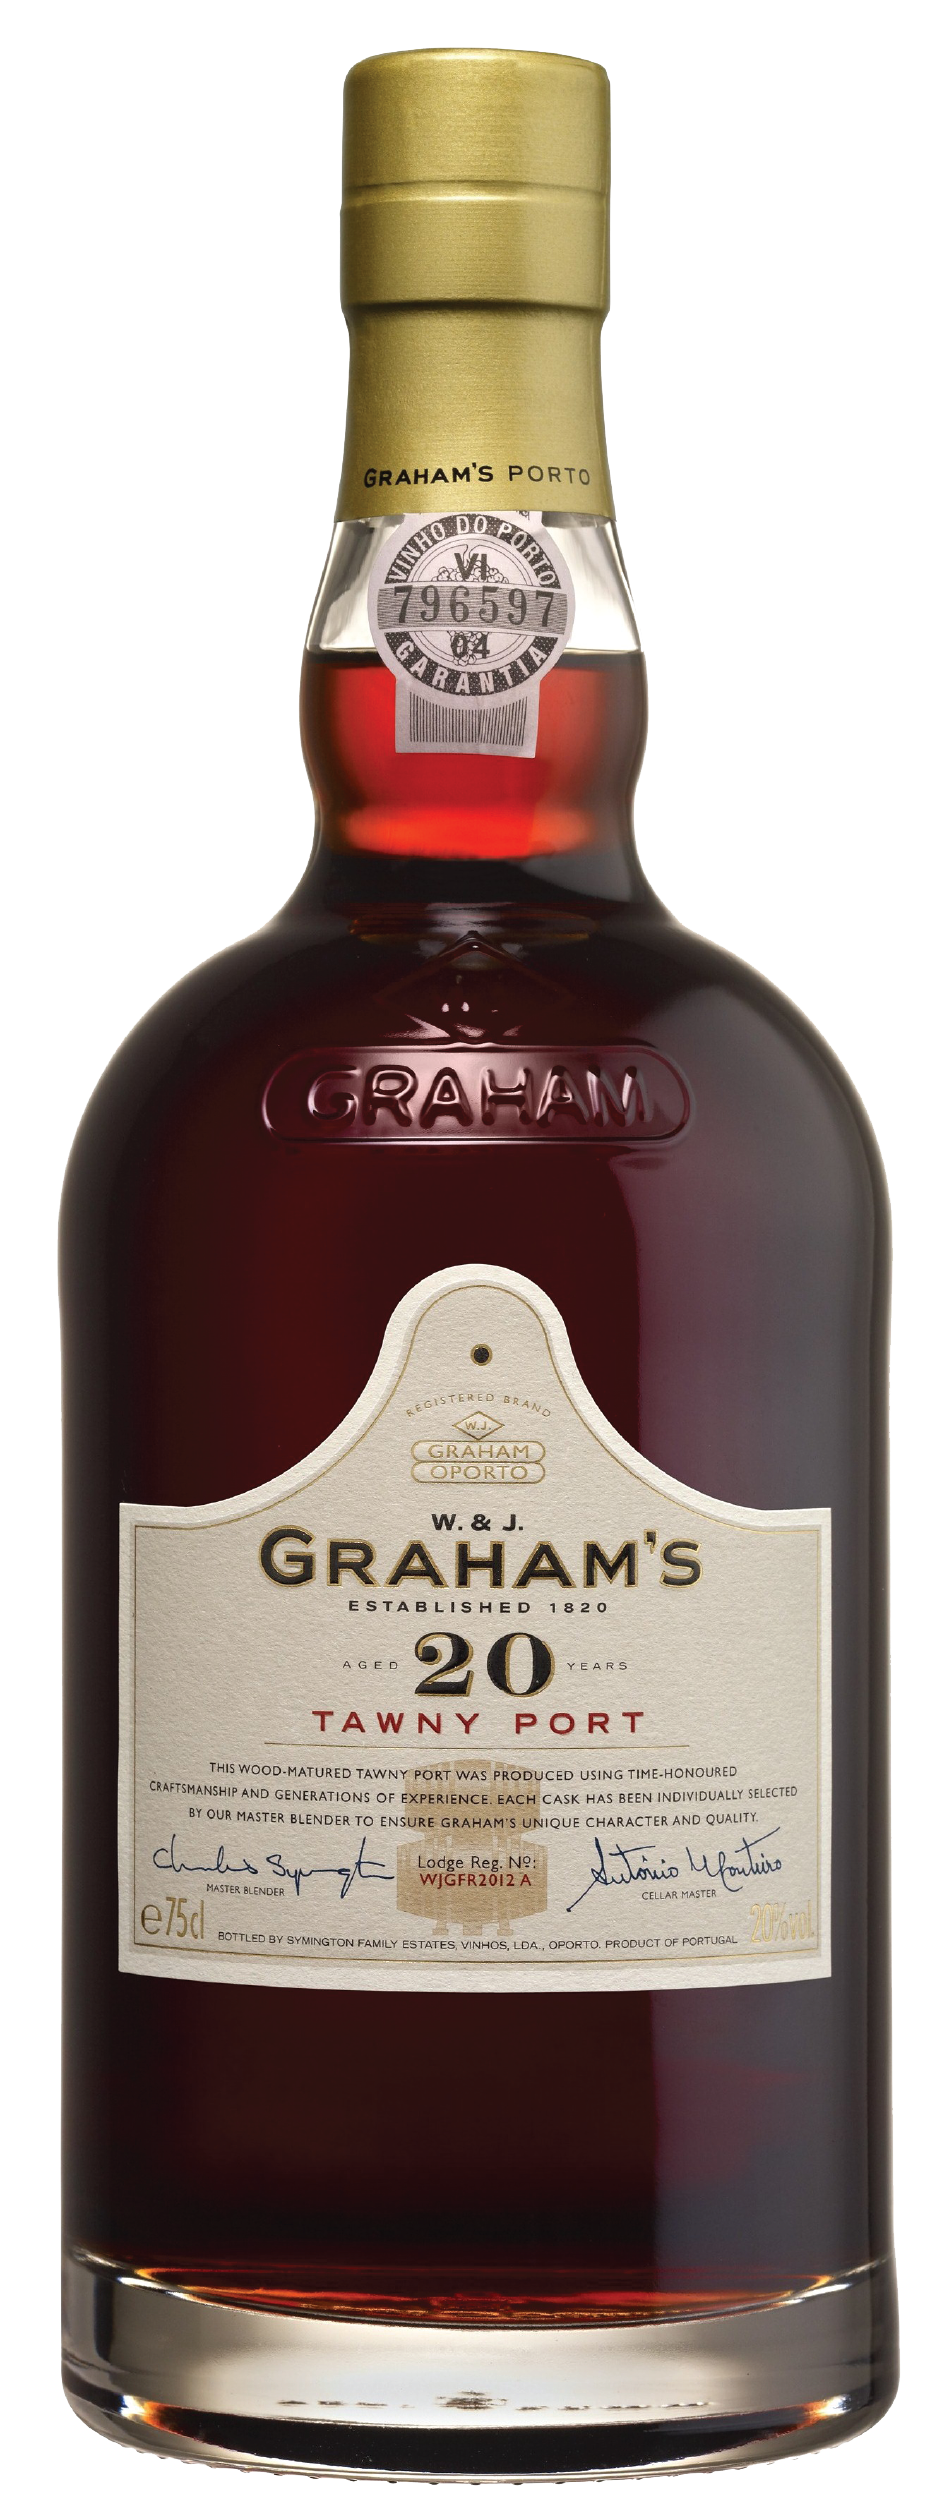 Product Image for GRAHAM'S 20 YEAR OLD TAWNY PORT - 375 ML